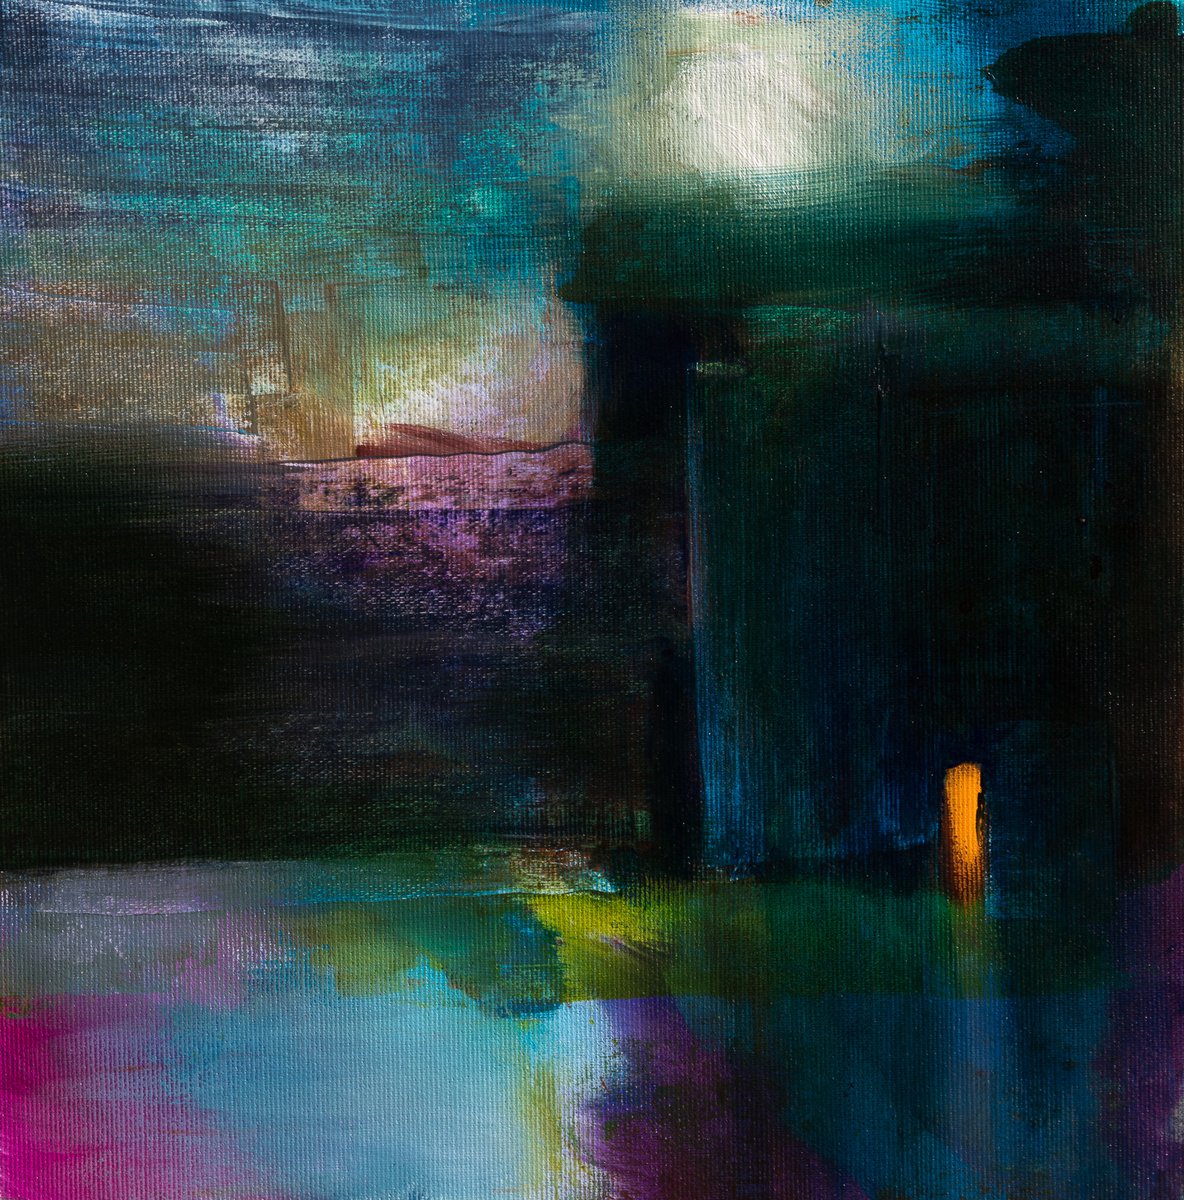 Night scene - nocturnal landscape Harbour ORIGINAL PAINTING ONE OF A KIND ARTWORK NO PRINTS Abstract decor design Home interior oil painting